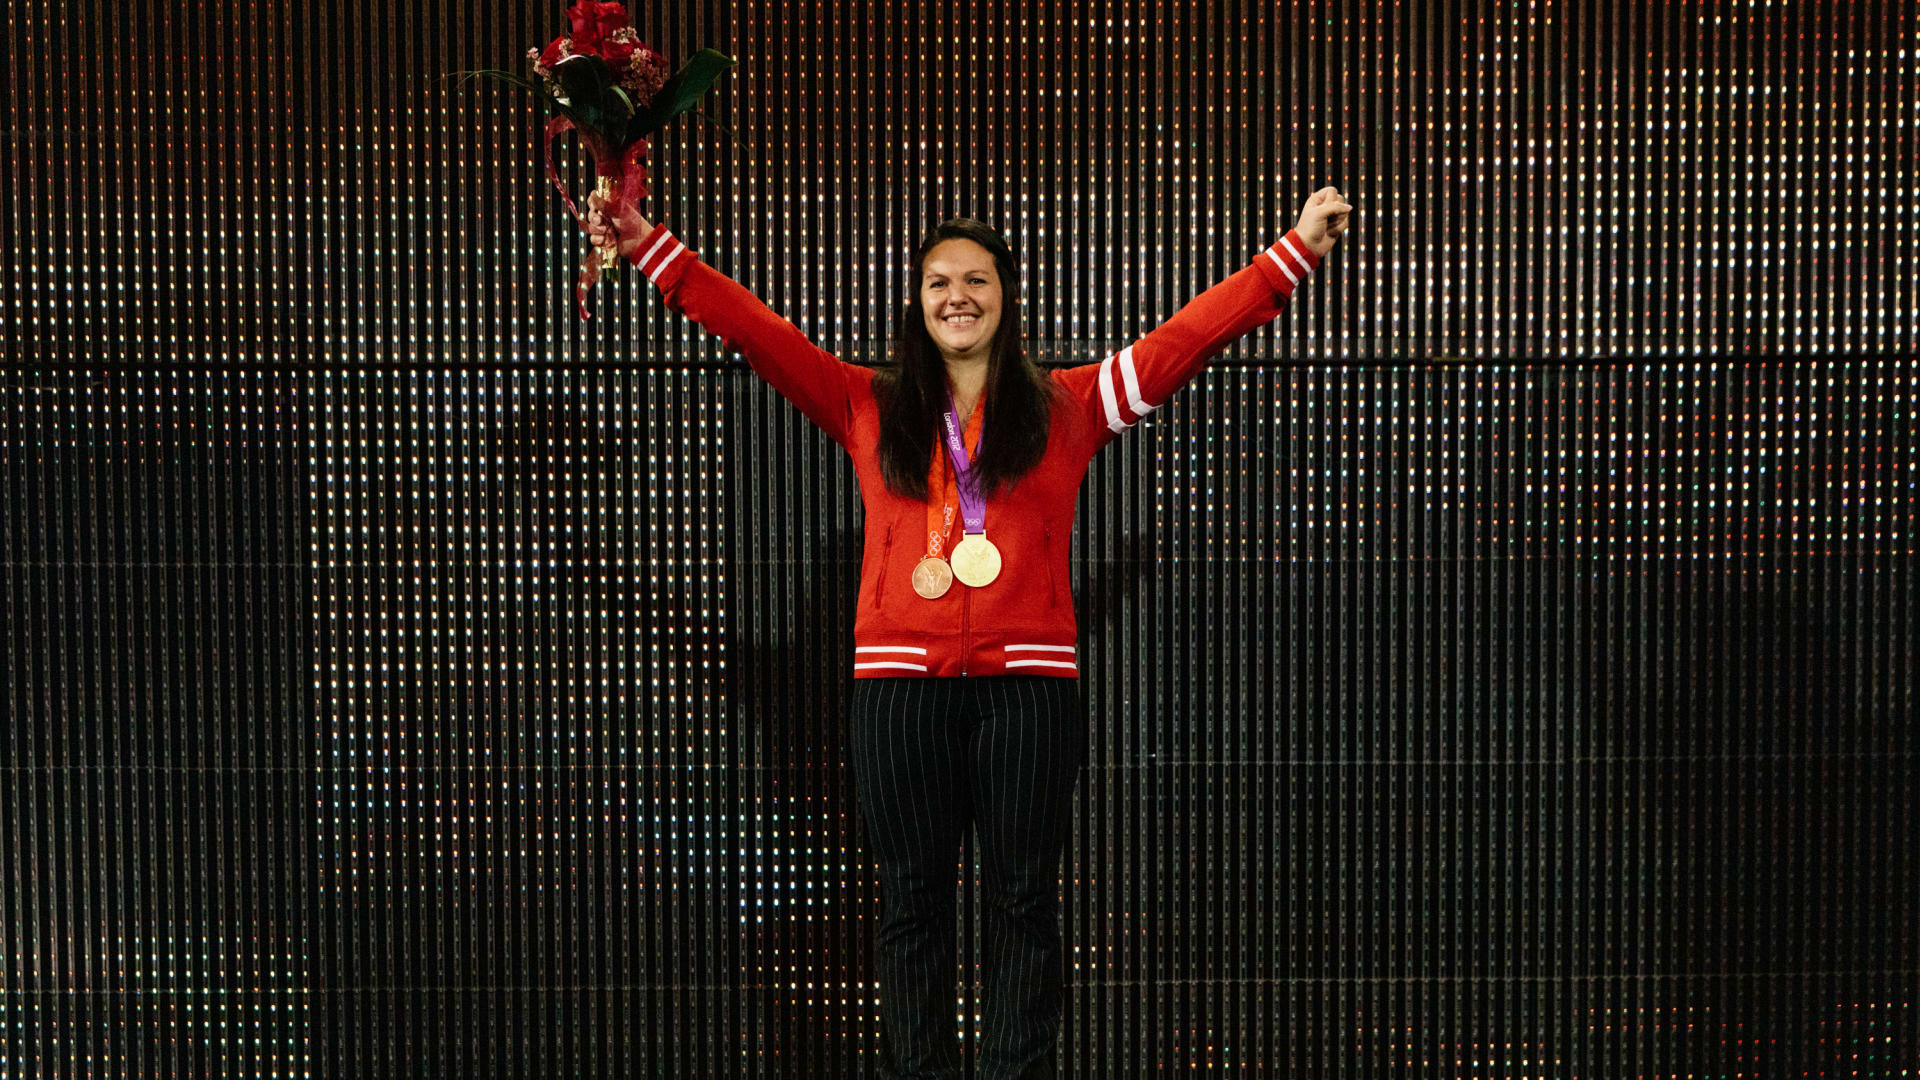 Canada's Christine Girard was presented with the Olympic gold medal from London 2012 last November after the two weightlifters in the under-63kg category ahead of her both tested positive for drugs ©Getty Images